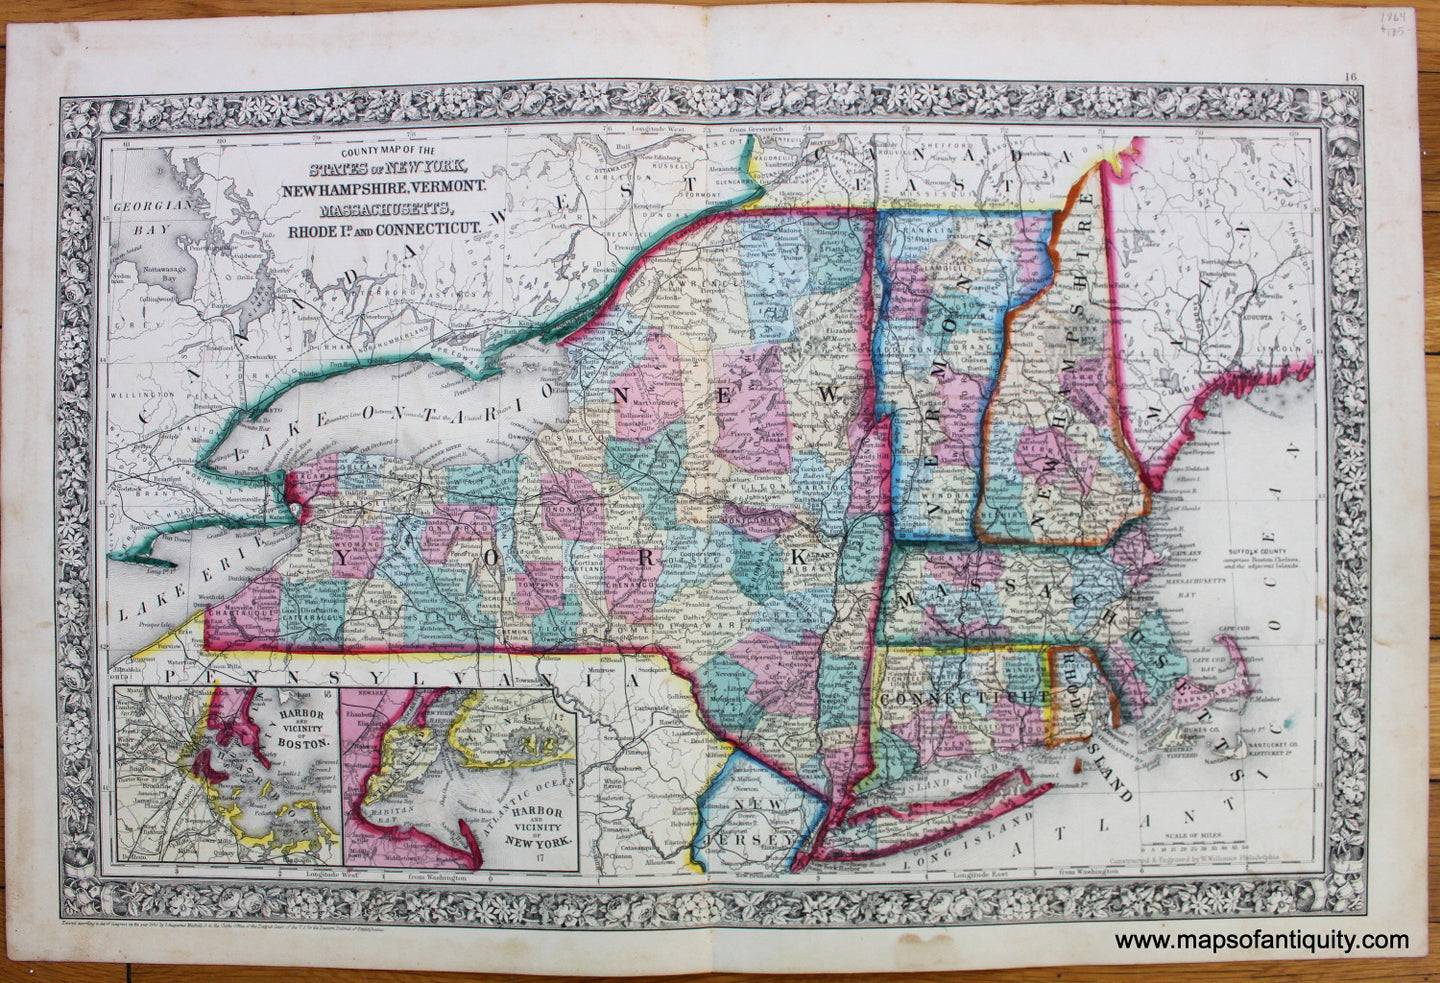 Antique-Map-County-Map-of-the-States-of-New-York-New-Hampshire-Vermont-Massachusetts-Rhode-Island-and-Connecticut.